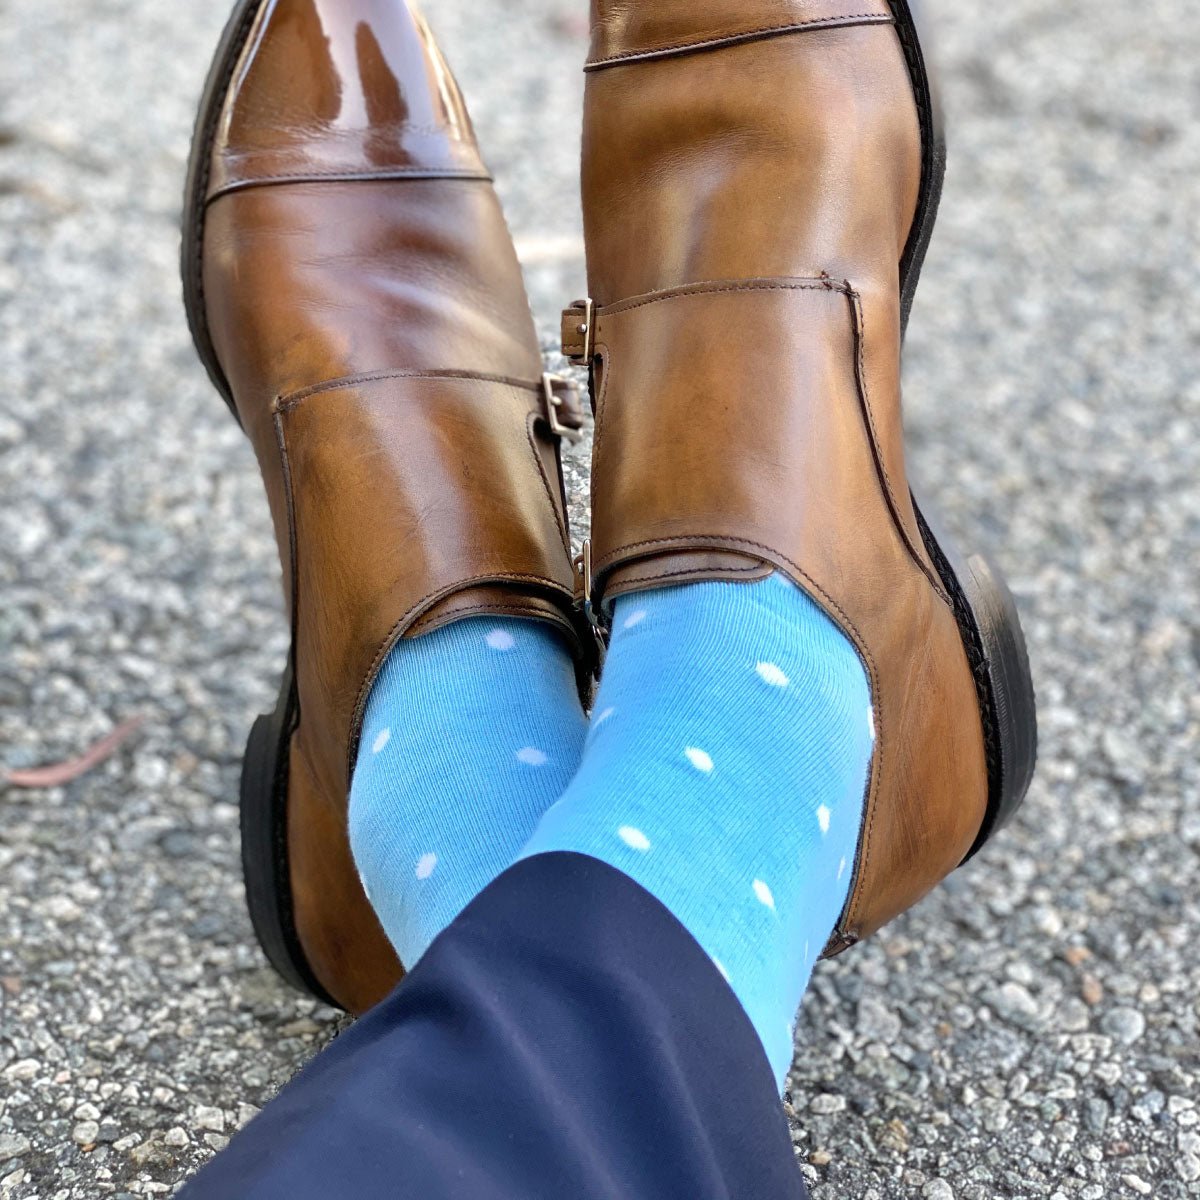 Man wearing navy slacks, light blue socks with white polka dots, and tan double monks trap shoes